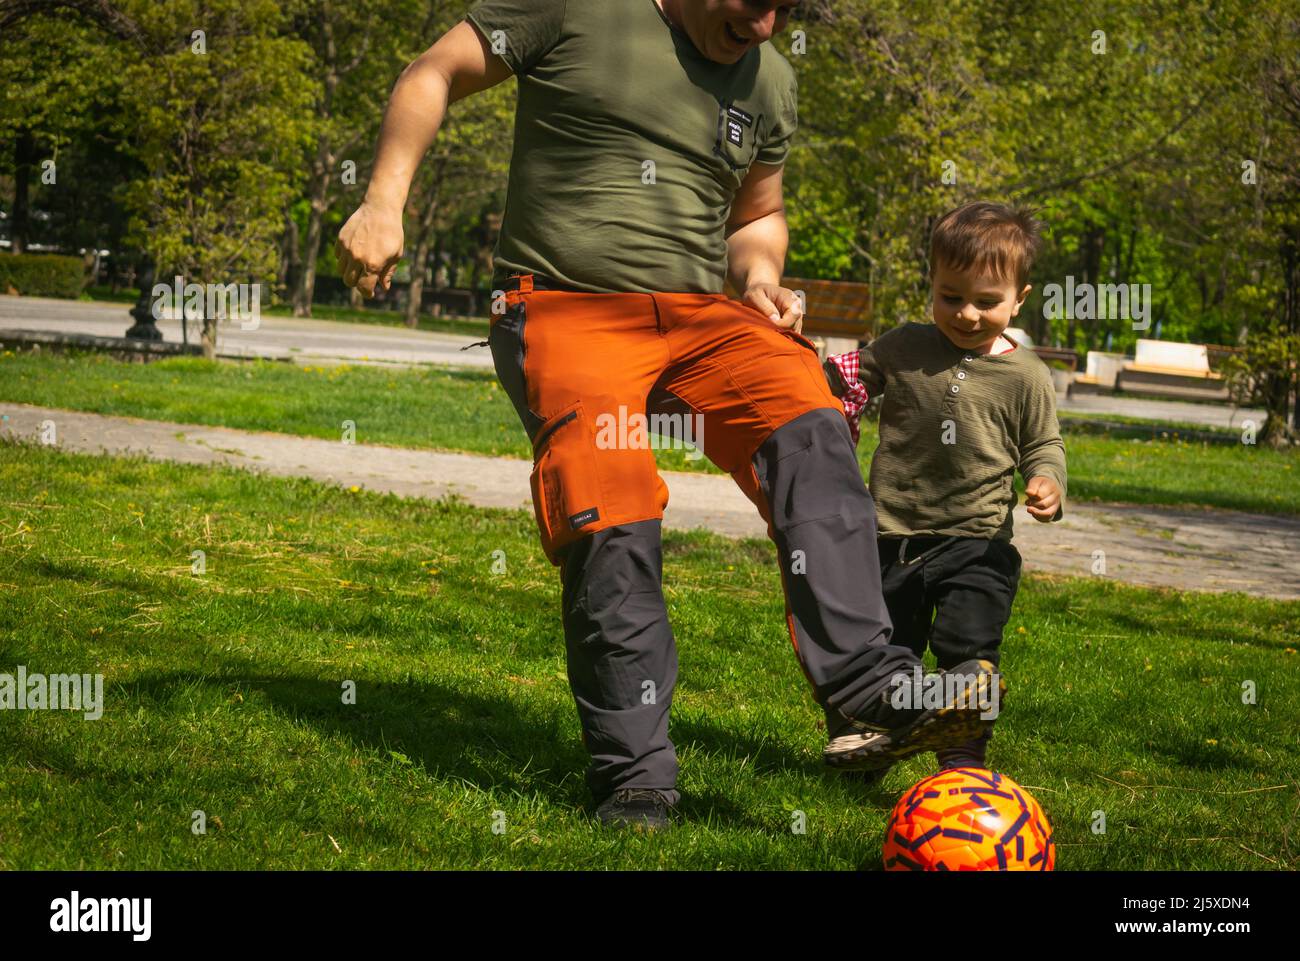 Father and son playing football in park outdoor family activities football fans supporters warming for Qatar World Cup 2022 father and son playing ama Stock Photo